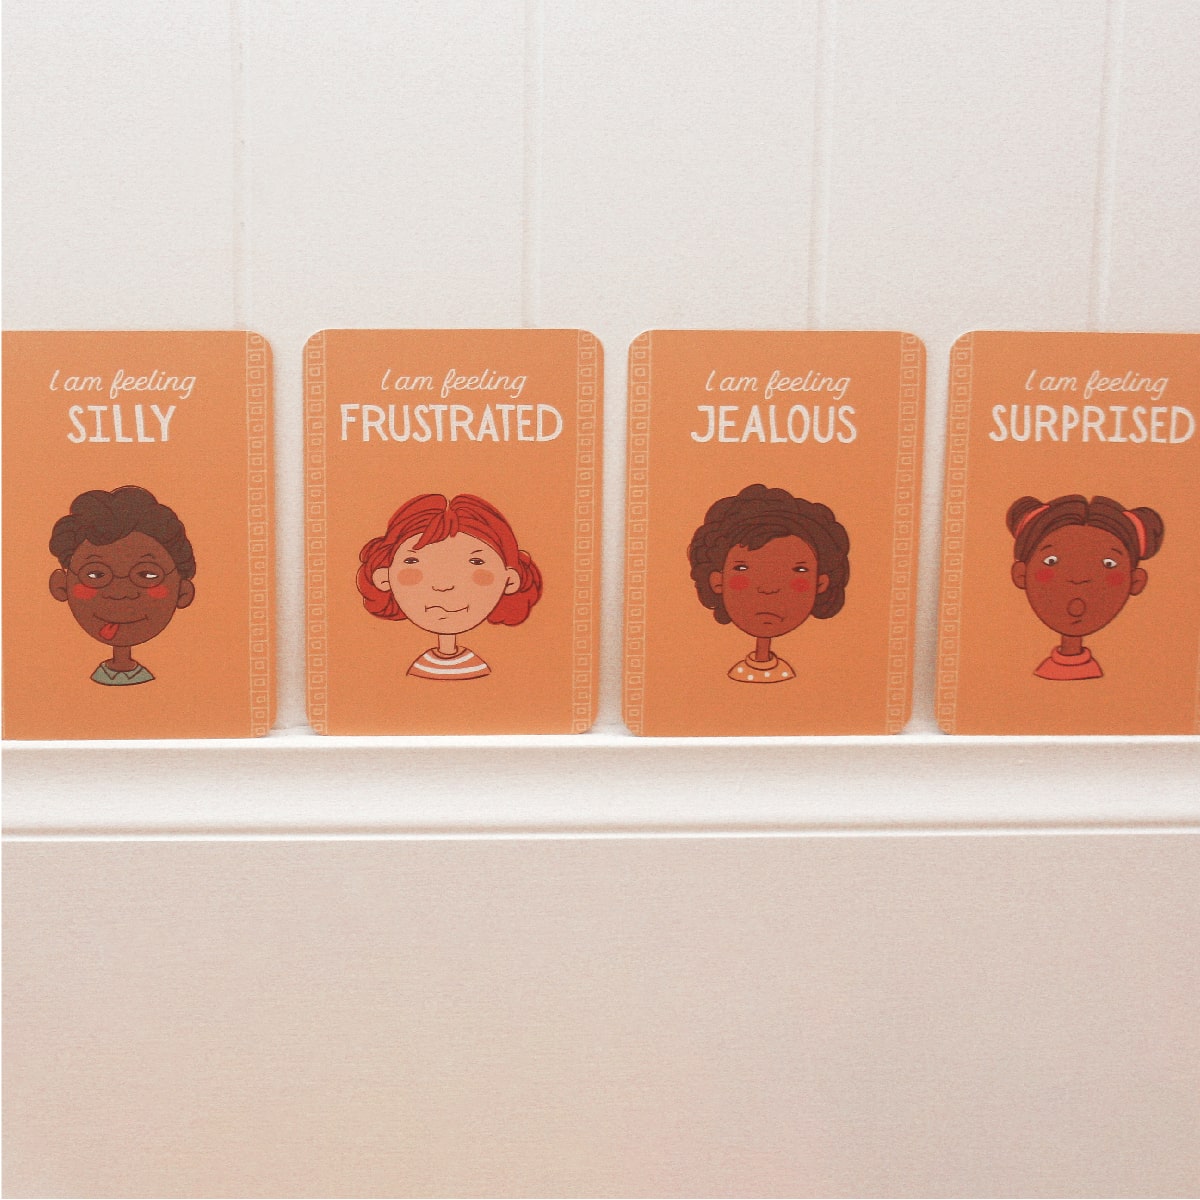 emotional intelligence emotions cards for kids, in bedroom hung on wall